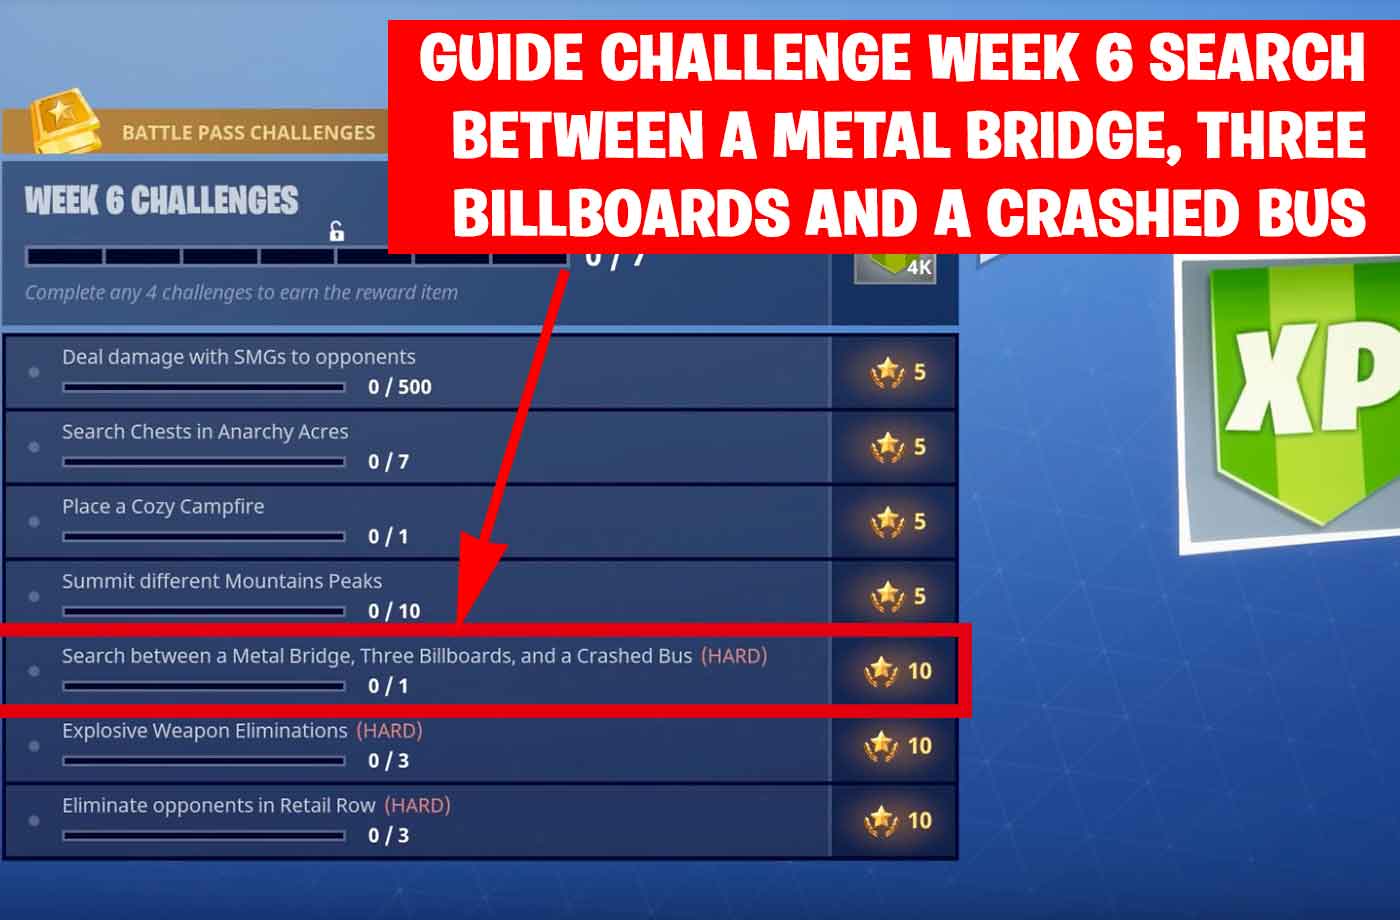 guide fortnite challenge week 6 search between a metal bridge three billboards and a crashed bus - guide to fortnite challenges